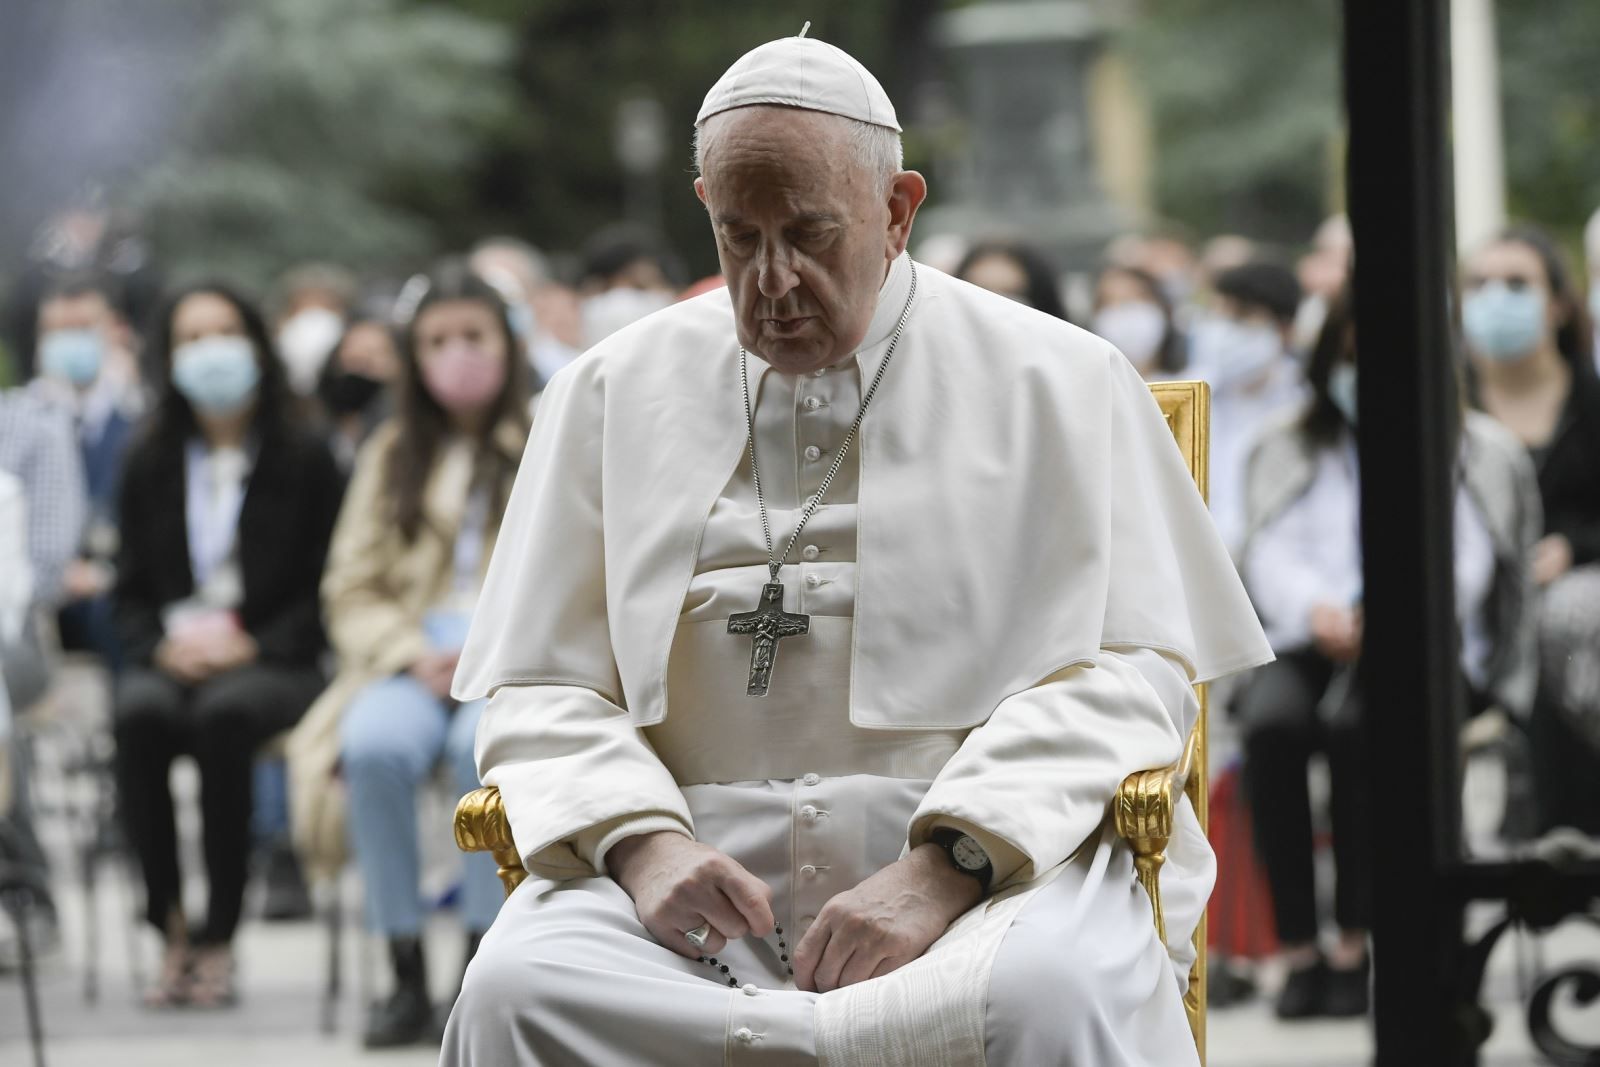 The Pope's Prayer Intention for March: For Victims